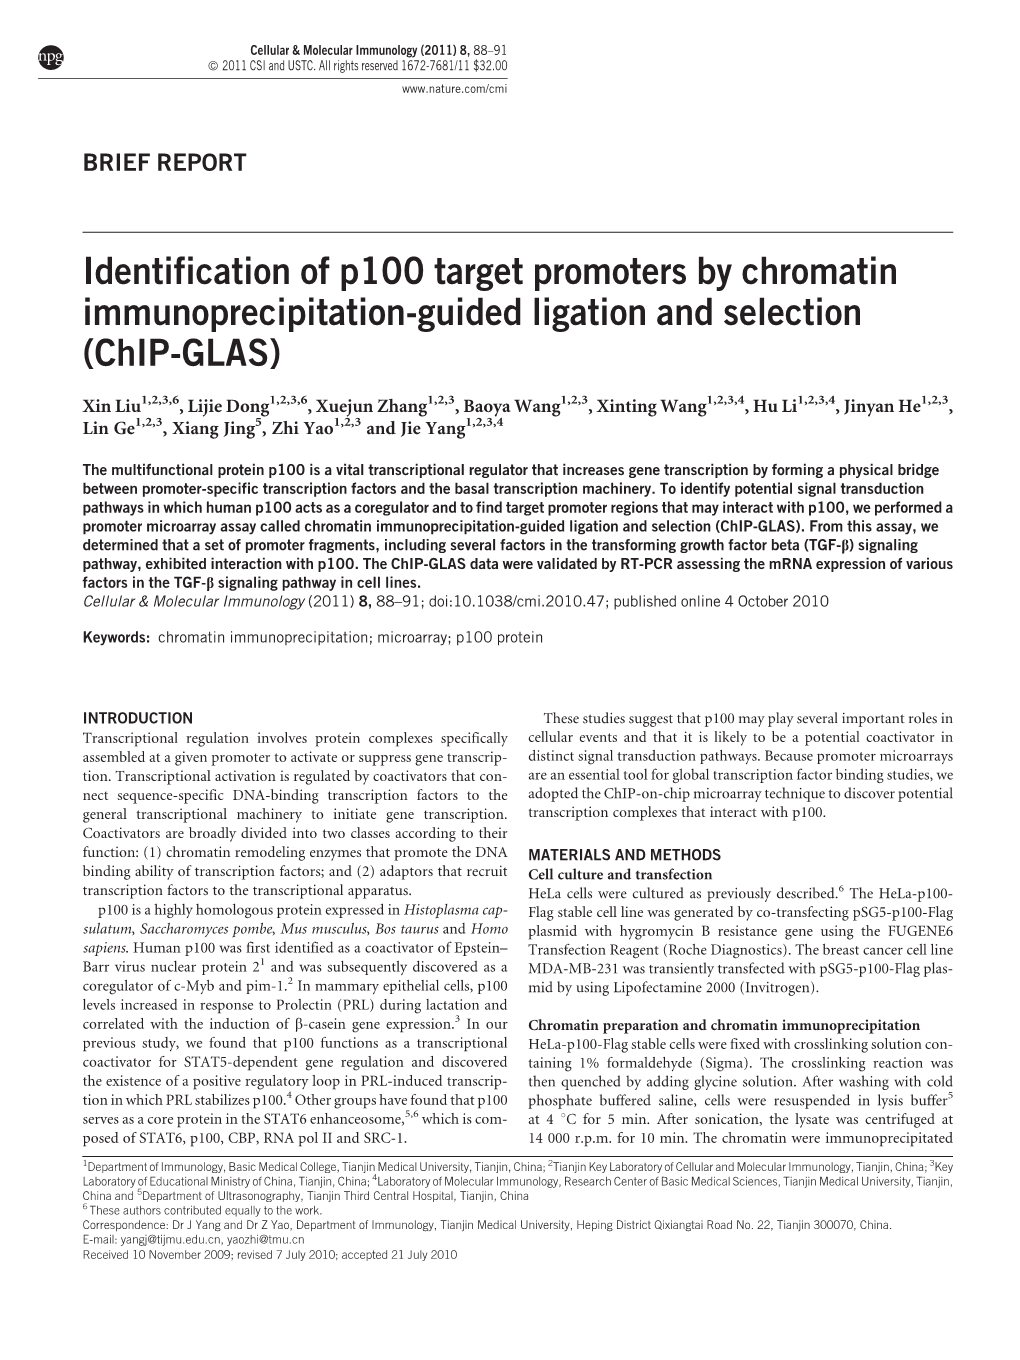 Identification of P100 Target Promoters by Chromatin Immunoprecipitation-Guided Ligation and Selection (Chip-GLAS)